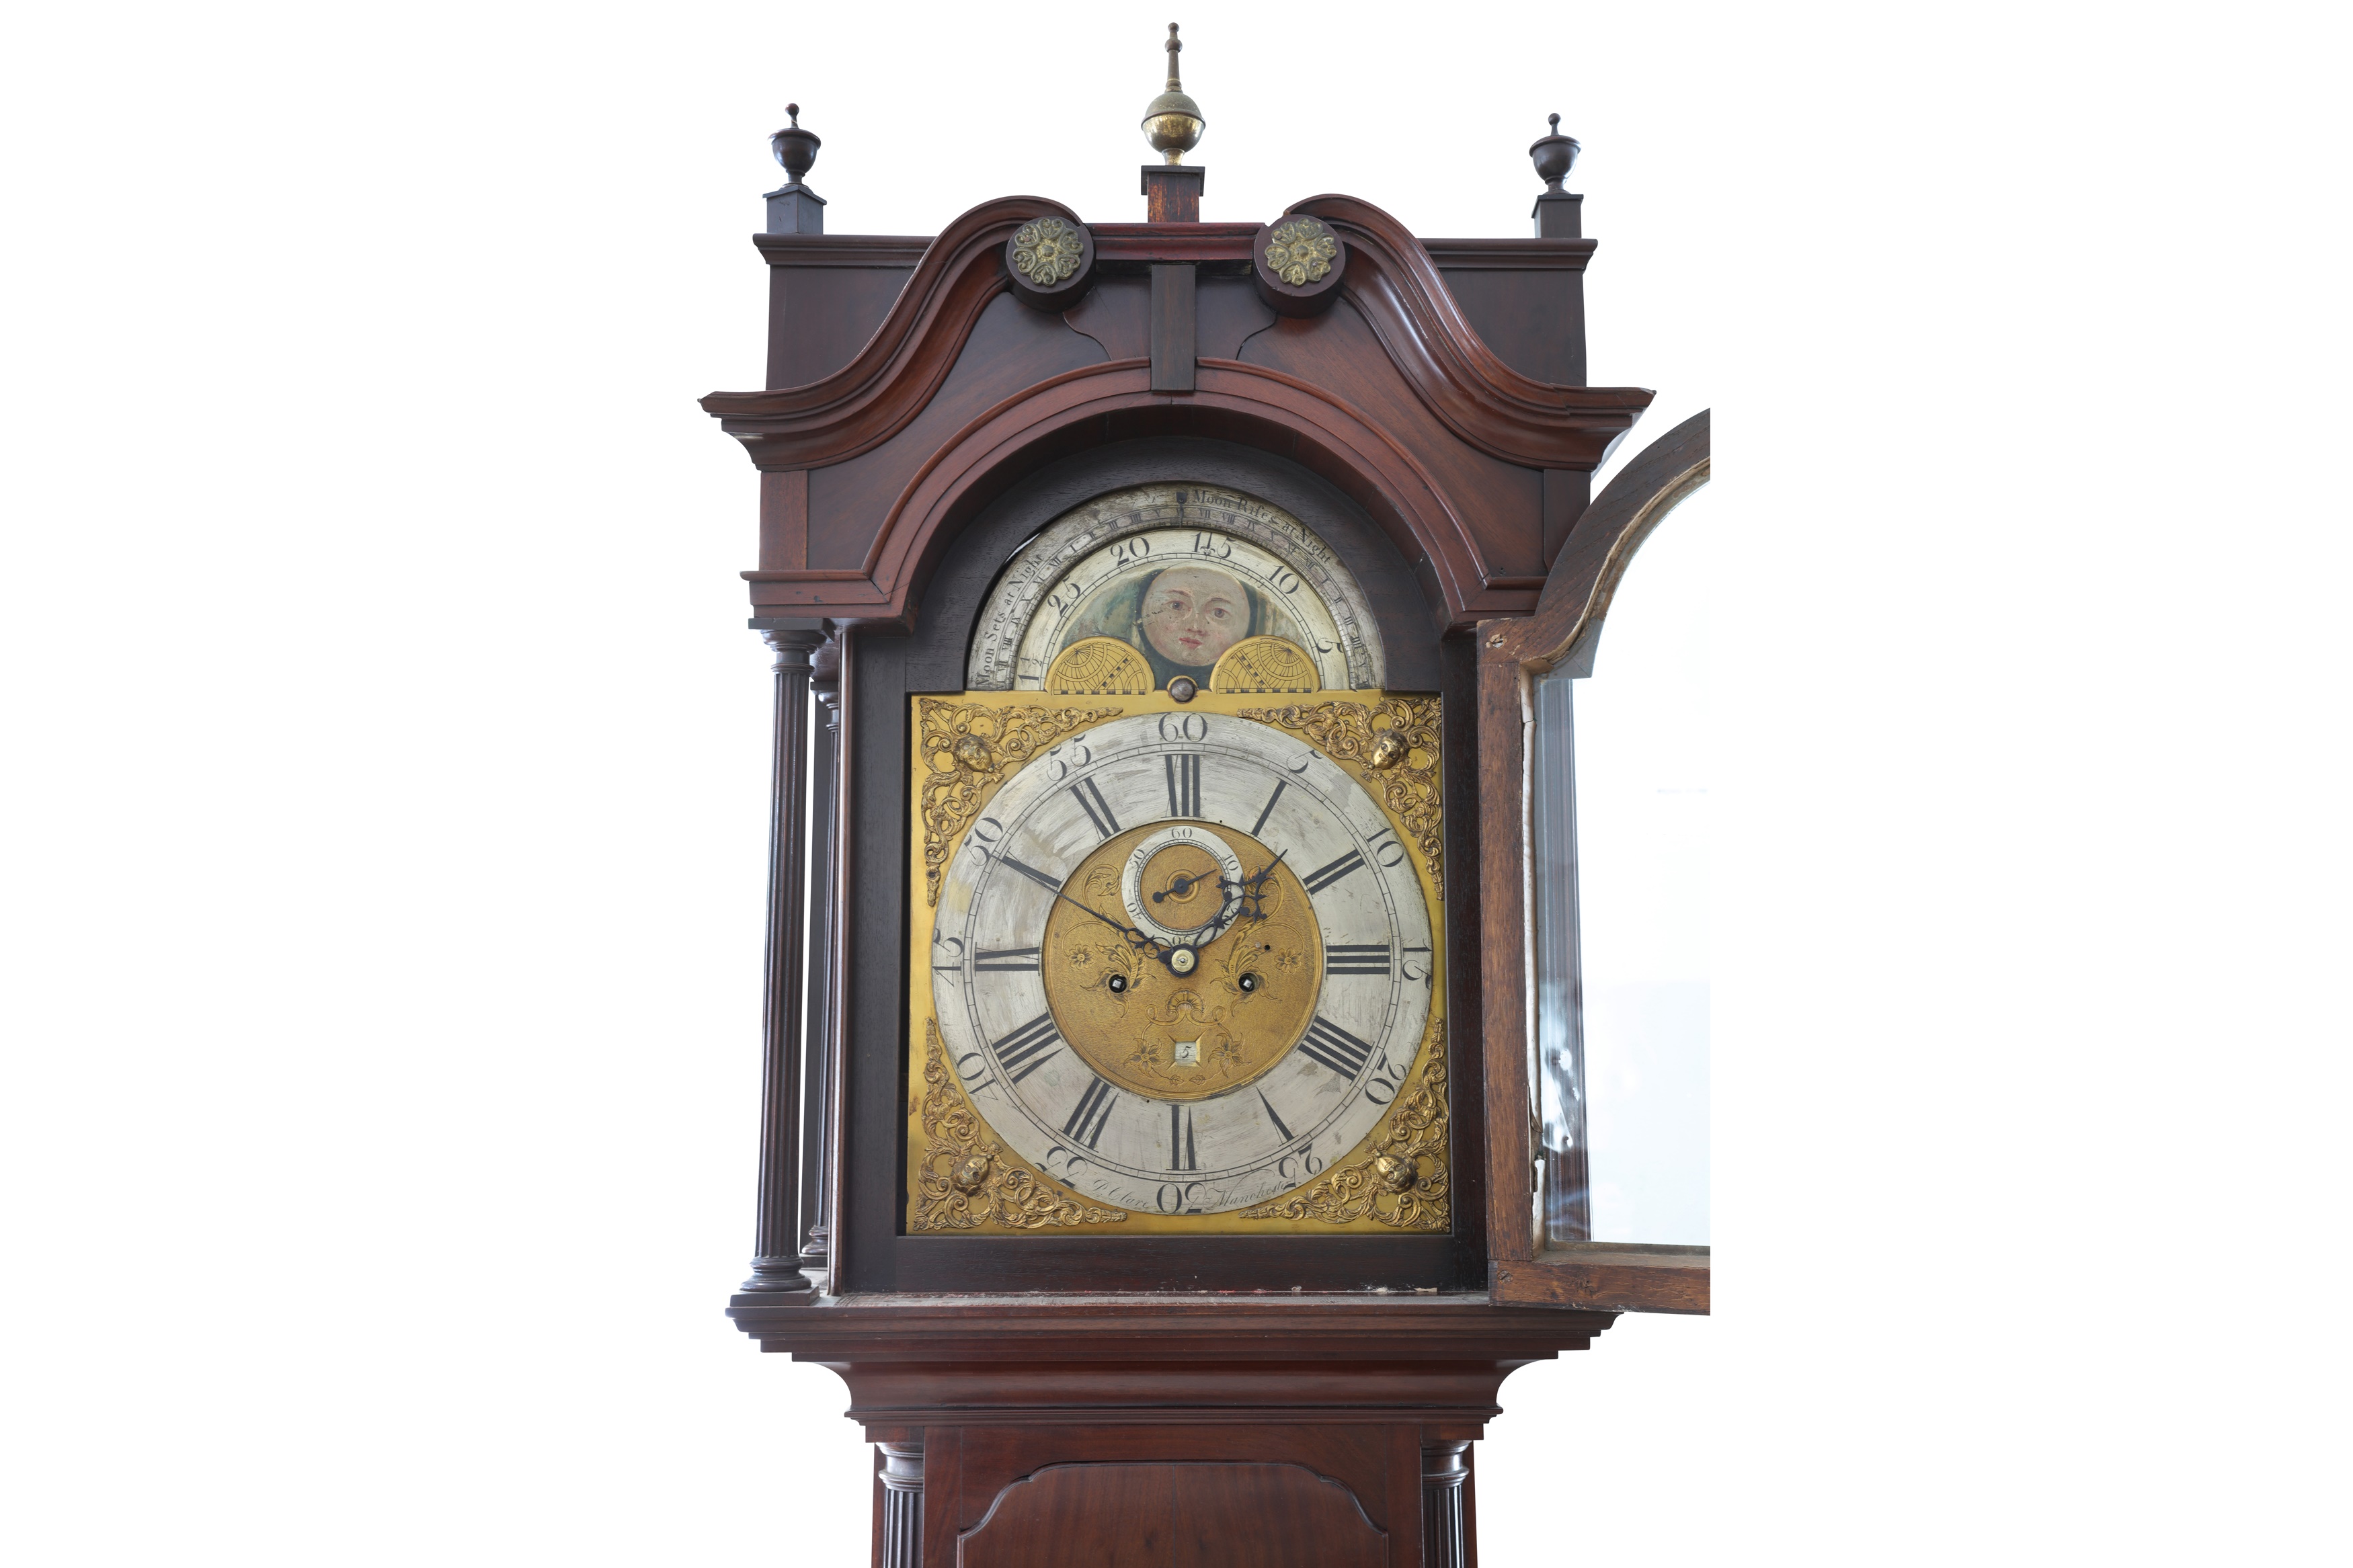 A LATE 18TH CENTURY ENGLISH MAHOGANY LONGCASE CLOCK BY PETER CLARE OF MANCHESTER - Image 2 of 2